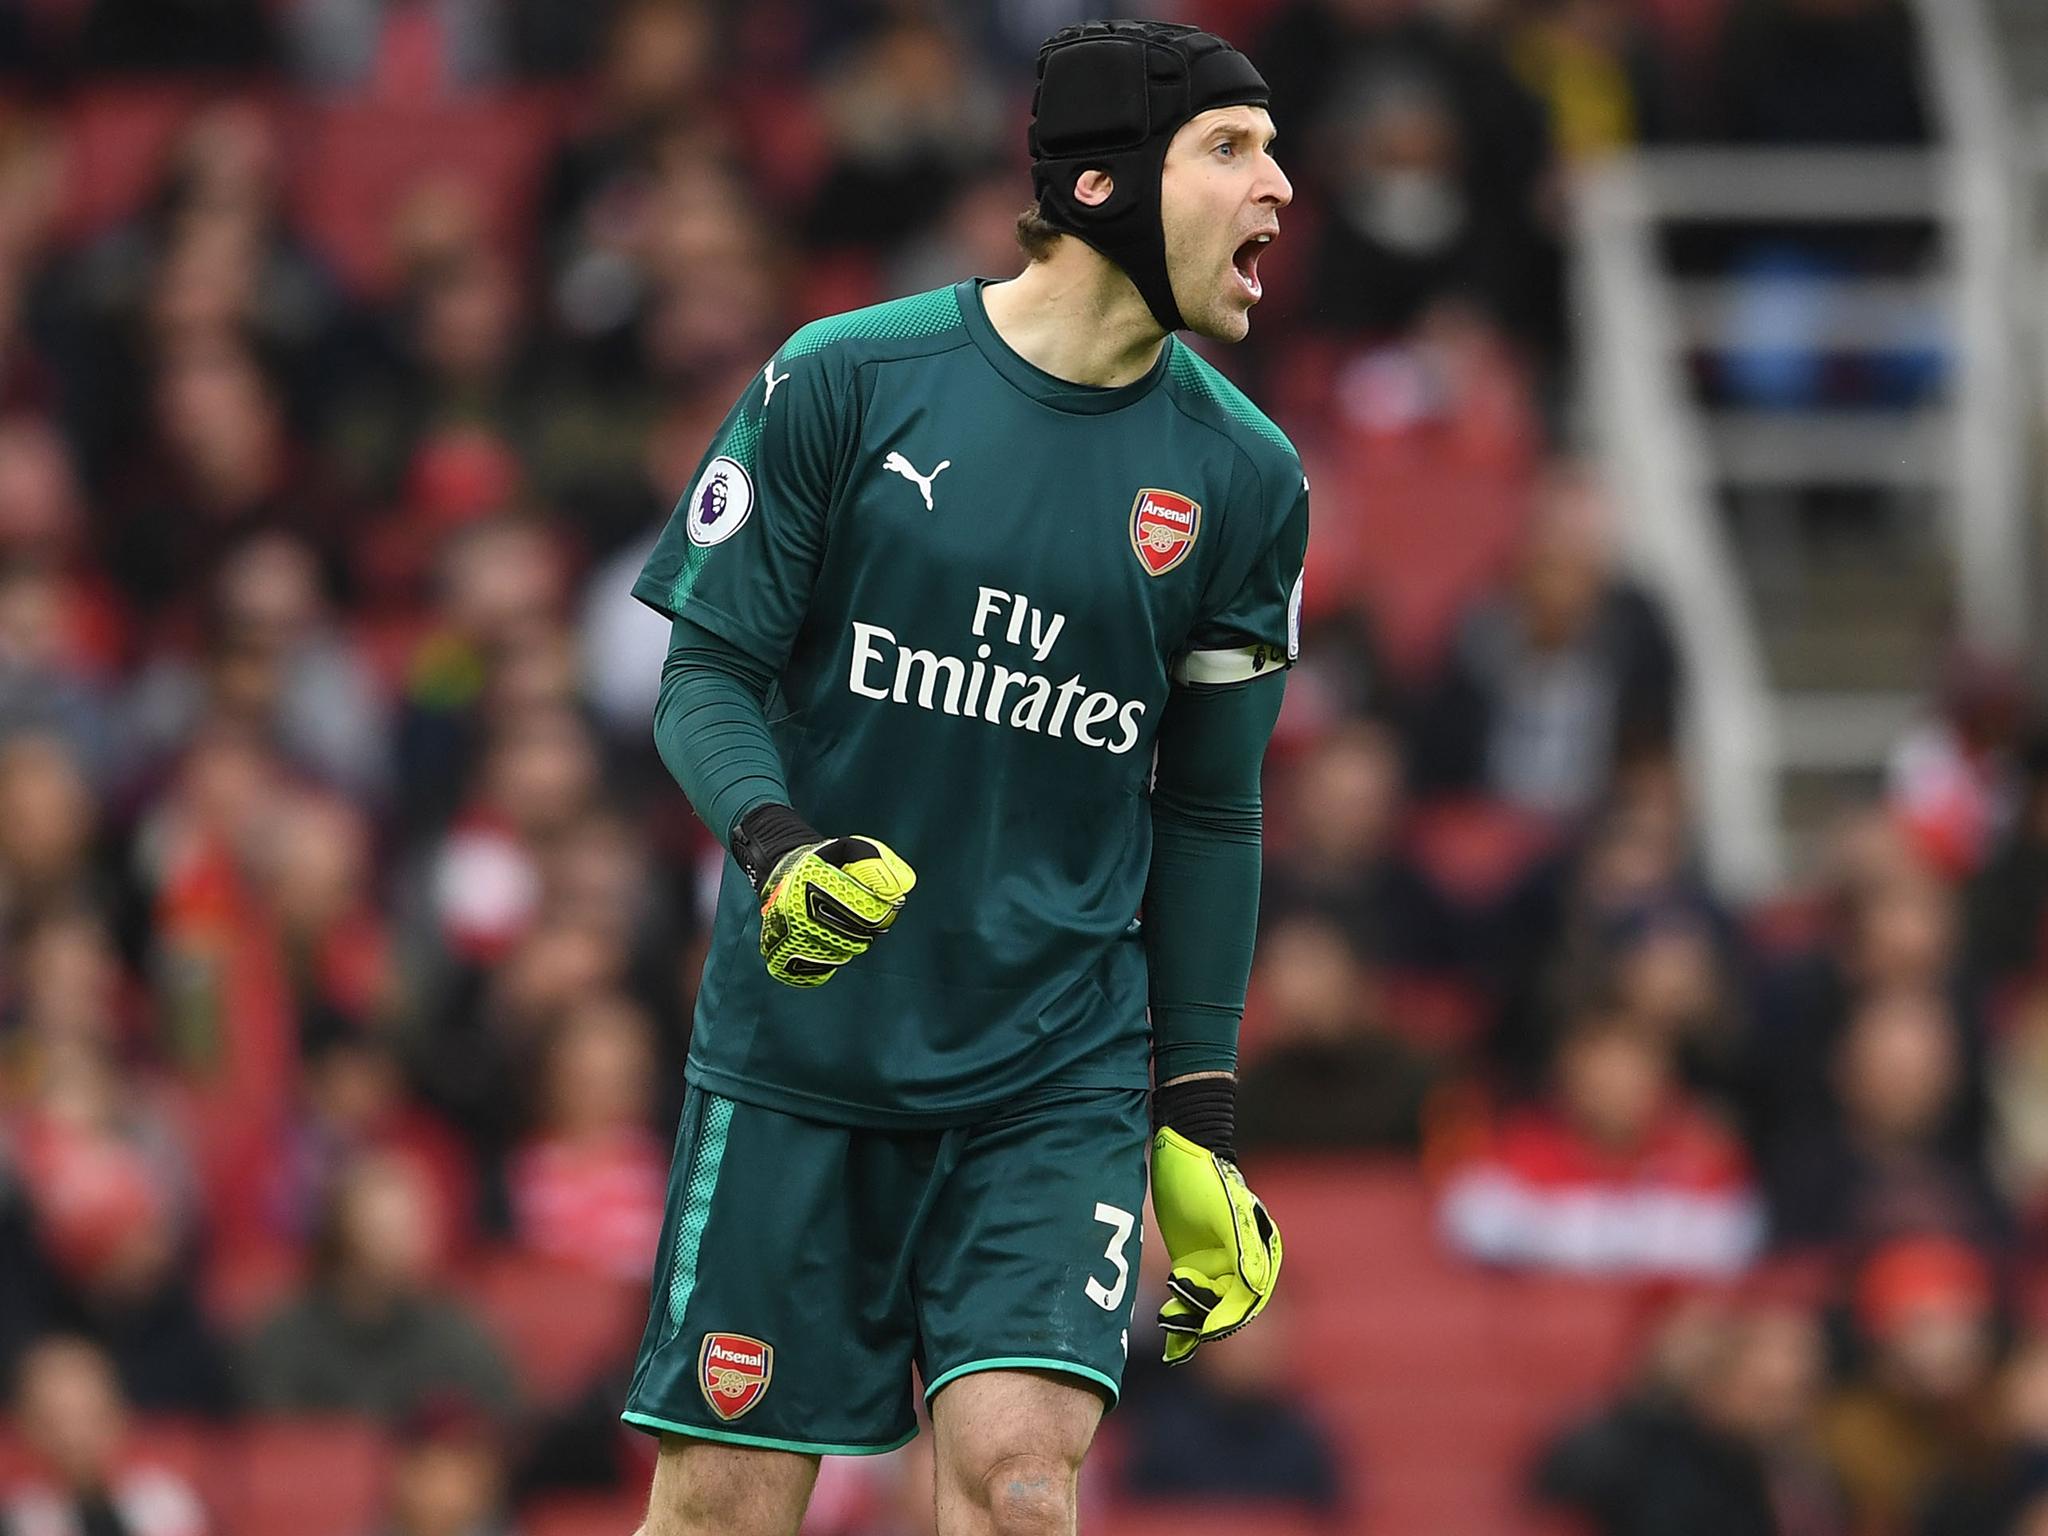 Petr Cech is a timeless bulwark behind Arsenal&apos;s erratic defence whose clean sheet record will endure for many years